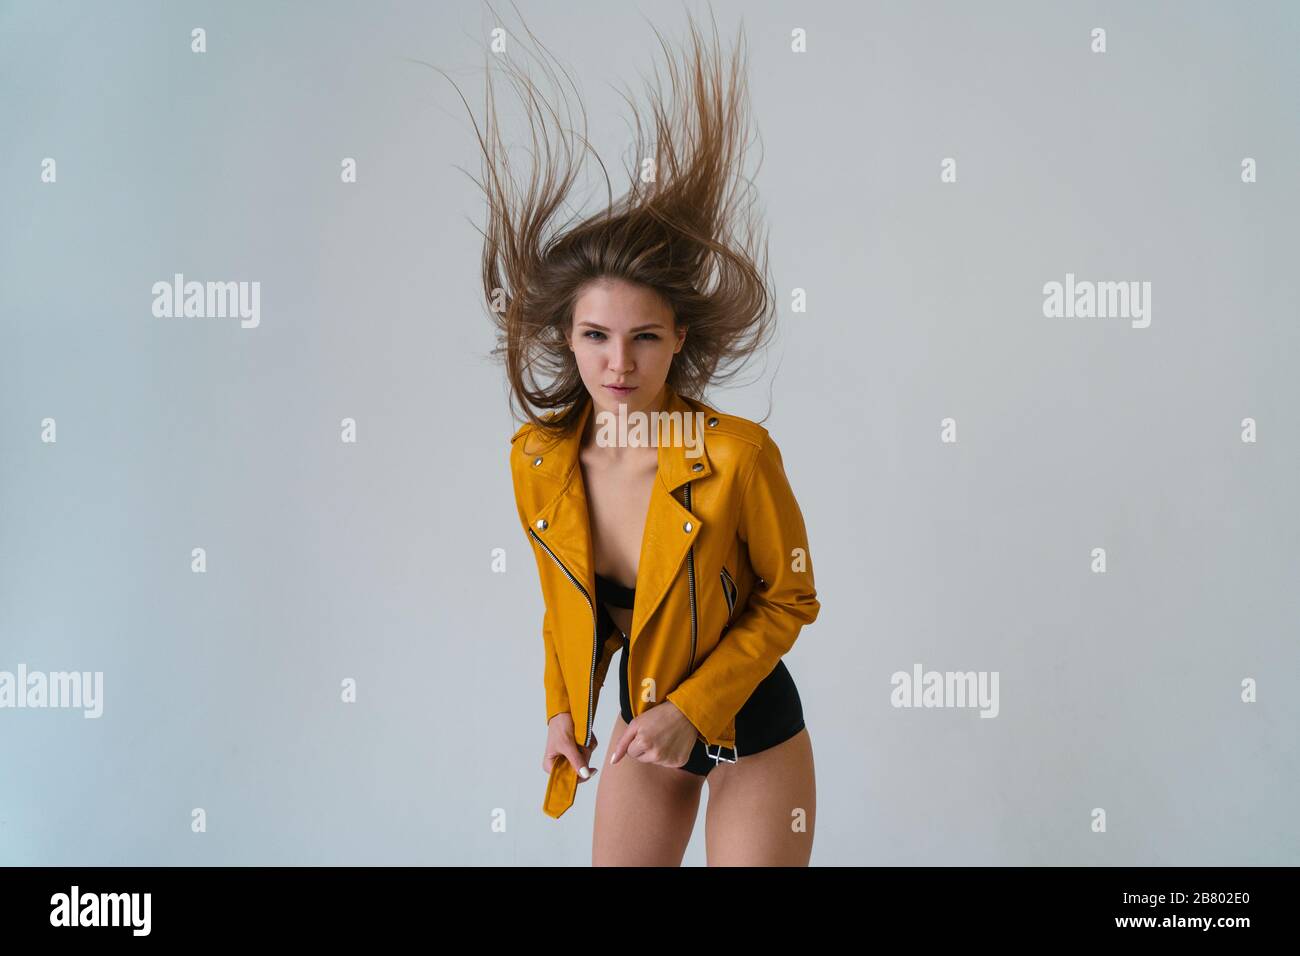 Young fair-skinned girl with long flying hair posing in the studio. wide angle lens and look at the camera. Stock Photo